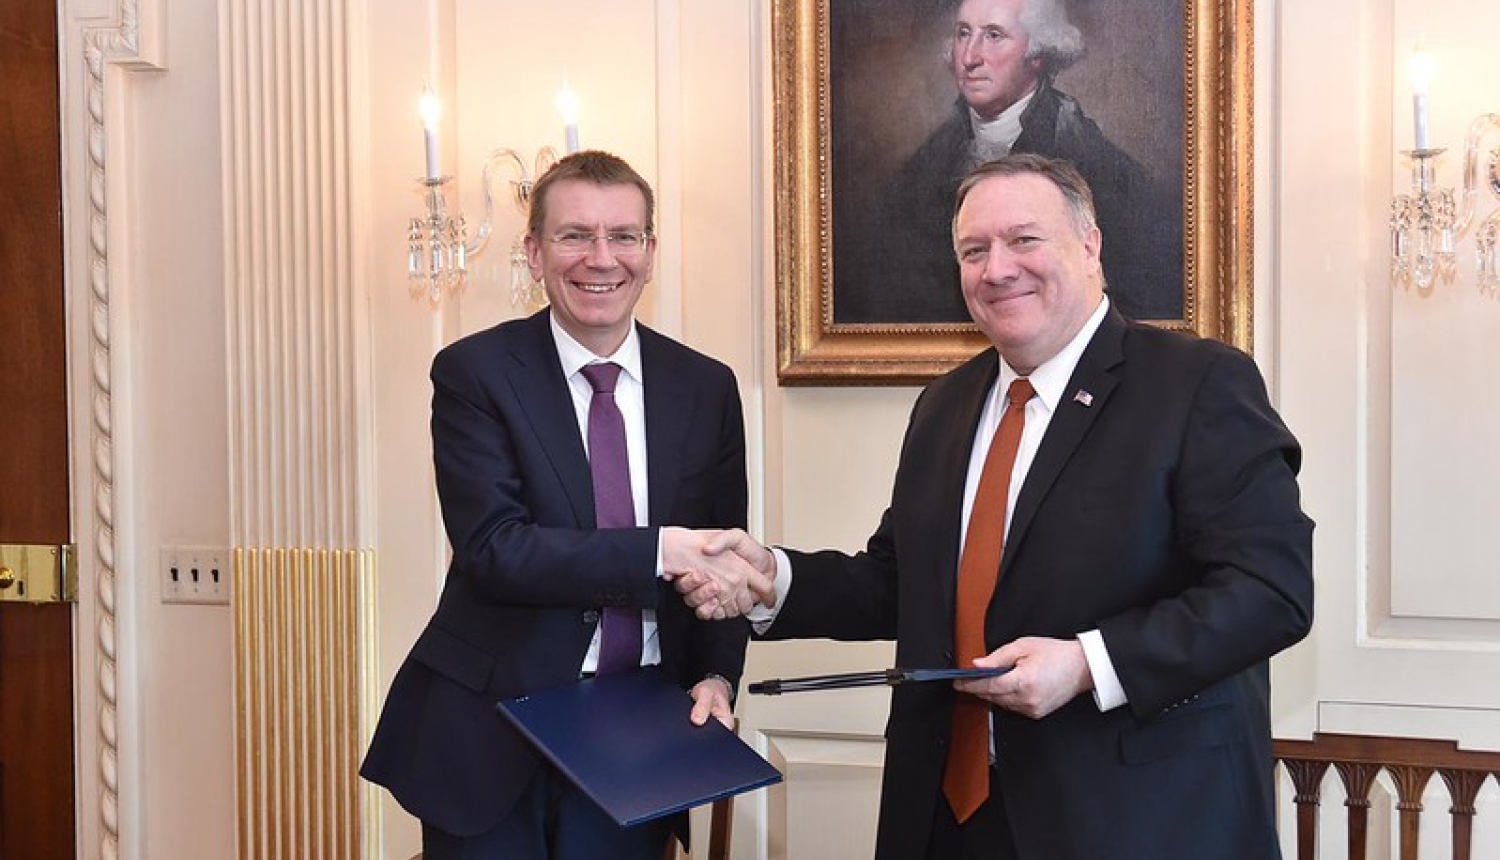 The Latvian Foreign Minister Edgars Rinkēvičs, and the United States Secretary of State, Mike Pompeo, sign a United States-Latvia Joint Declaration on 5G Security